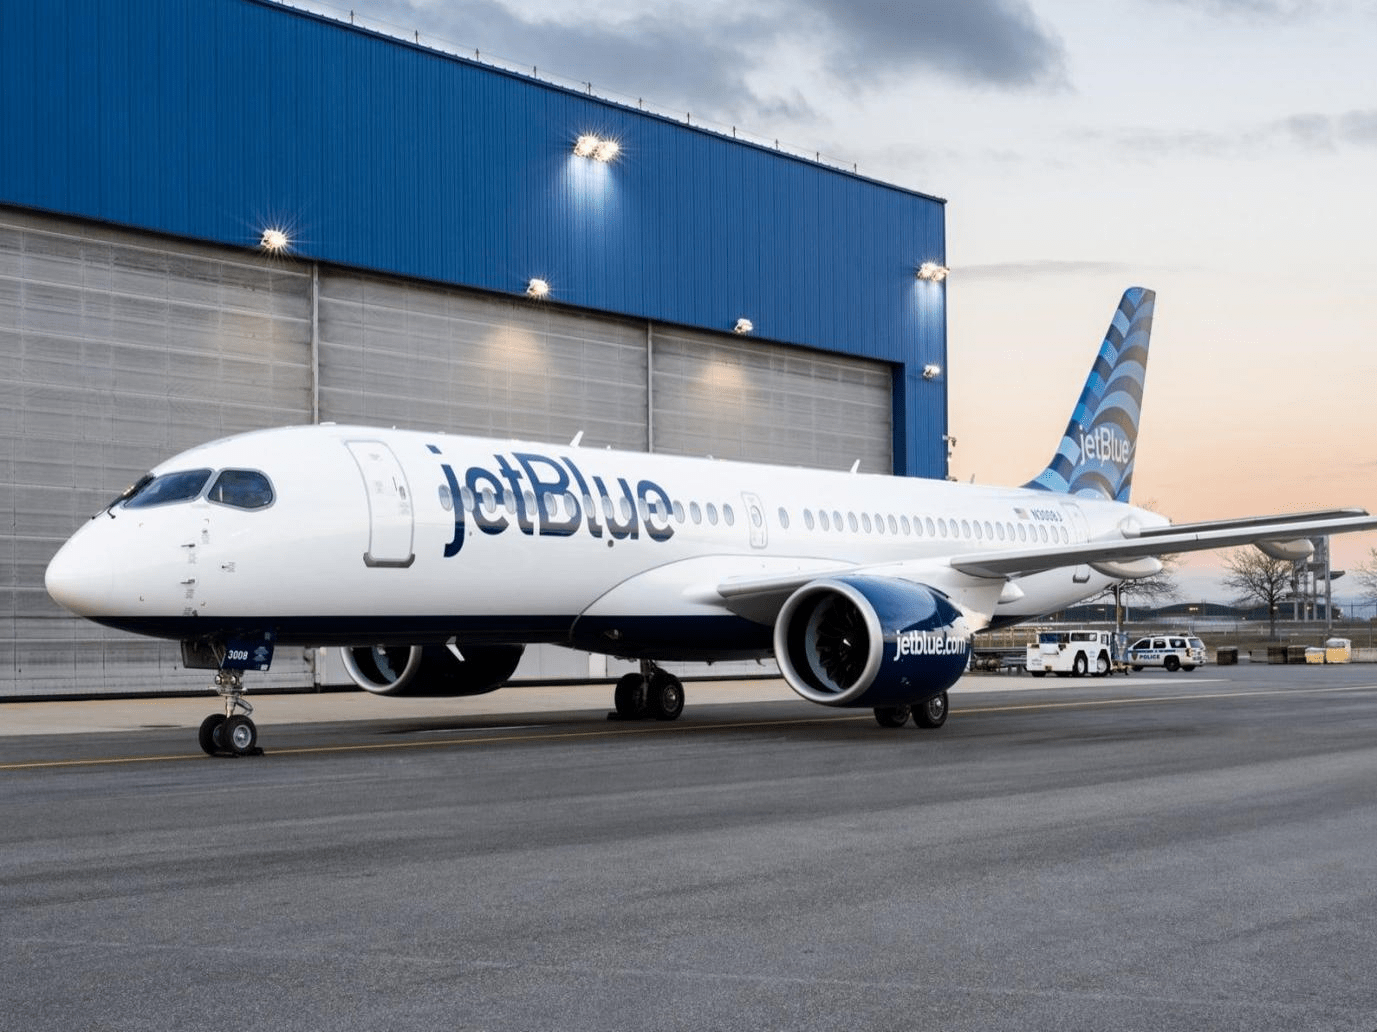 JetBlue will call flight attendants back to work tomeet increased demand